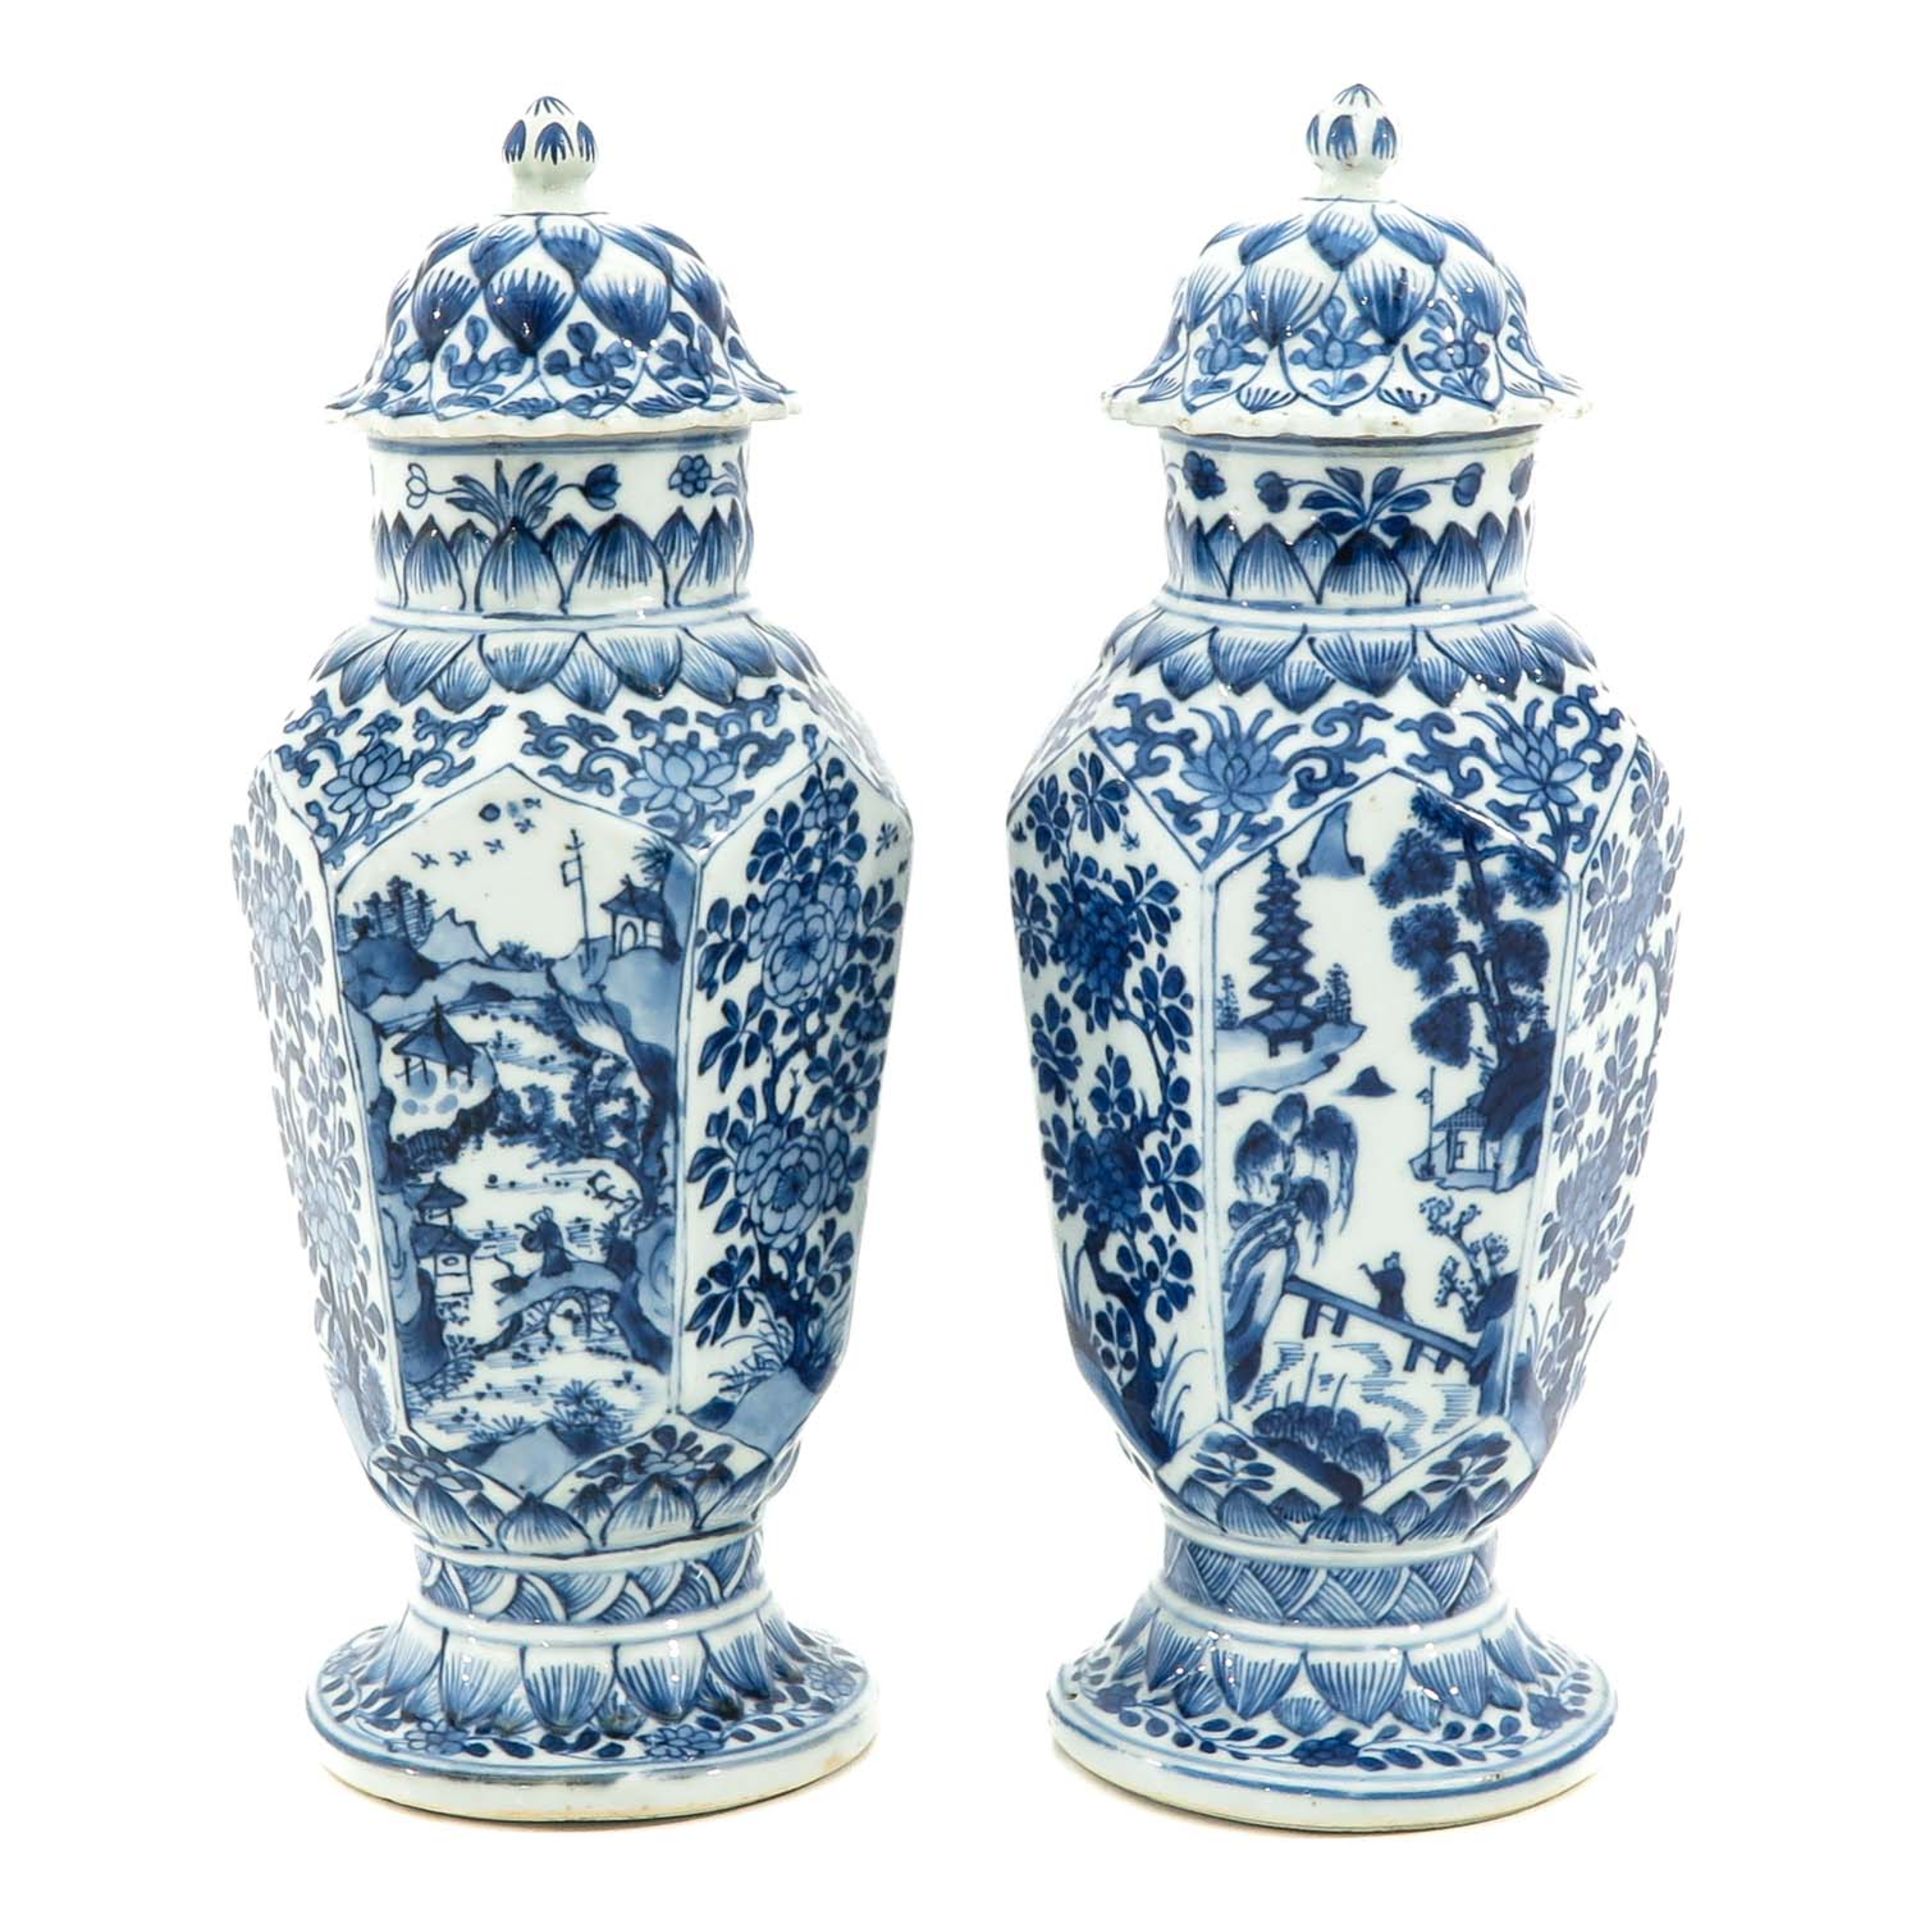 A Pair of Blue and White Vases with Covers